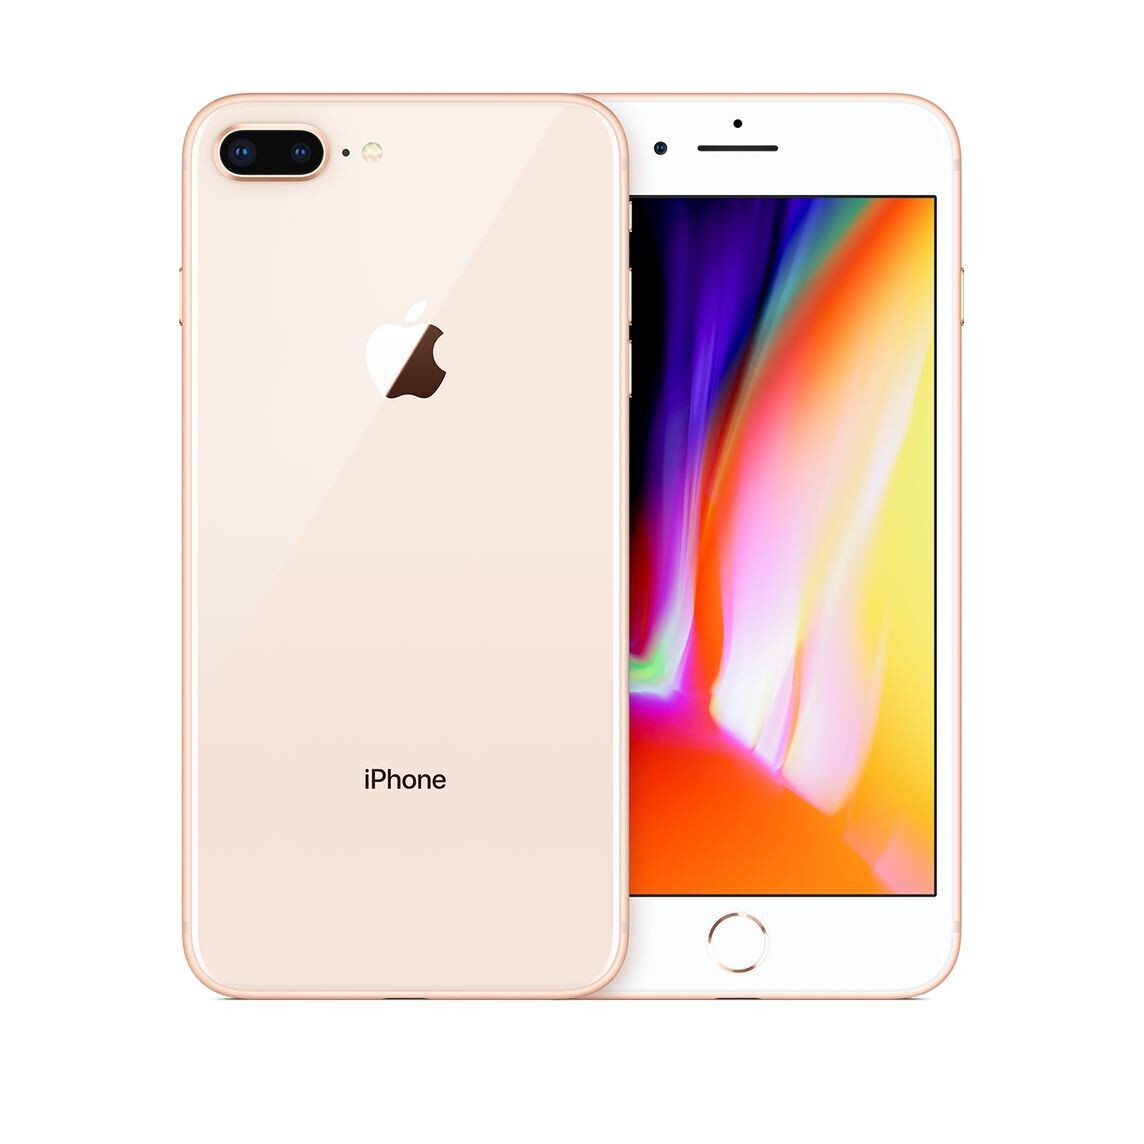 iPhone 8 + 64 GB (Unlocked For All Services)